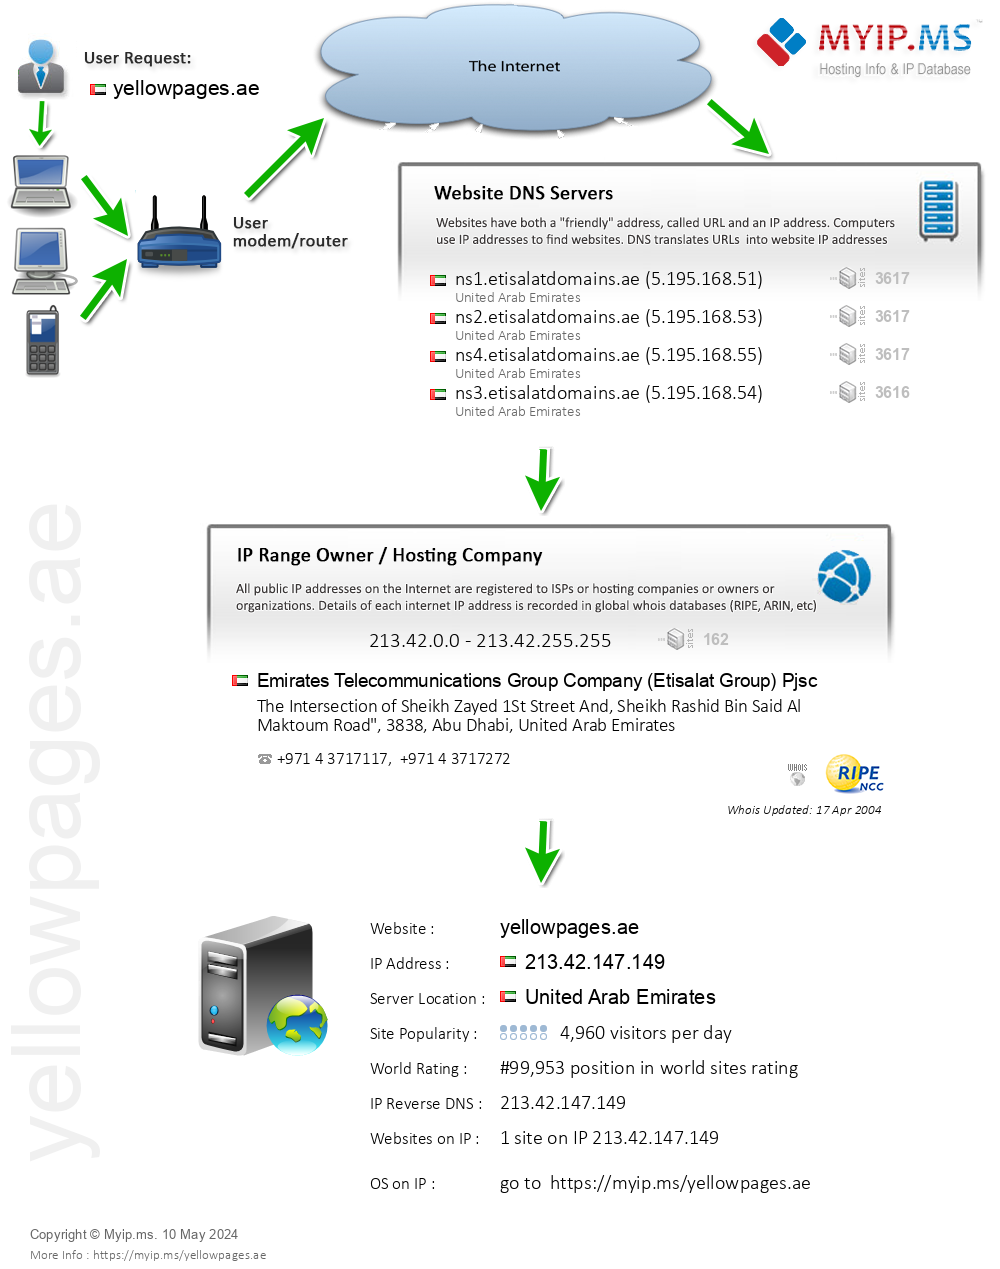 Yellowpages.ae - Website Hosting Visual IP Diagram